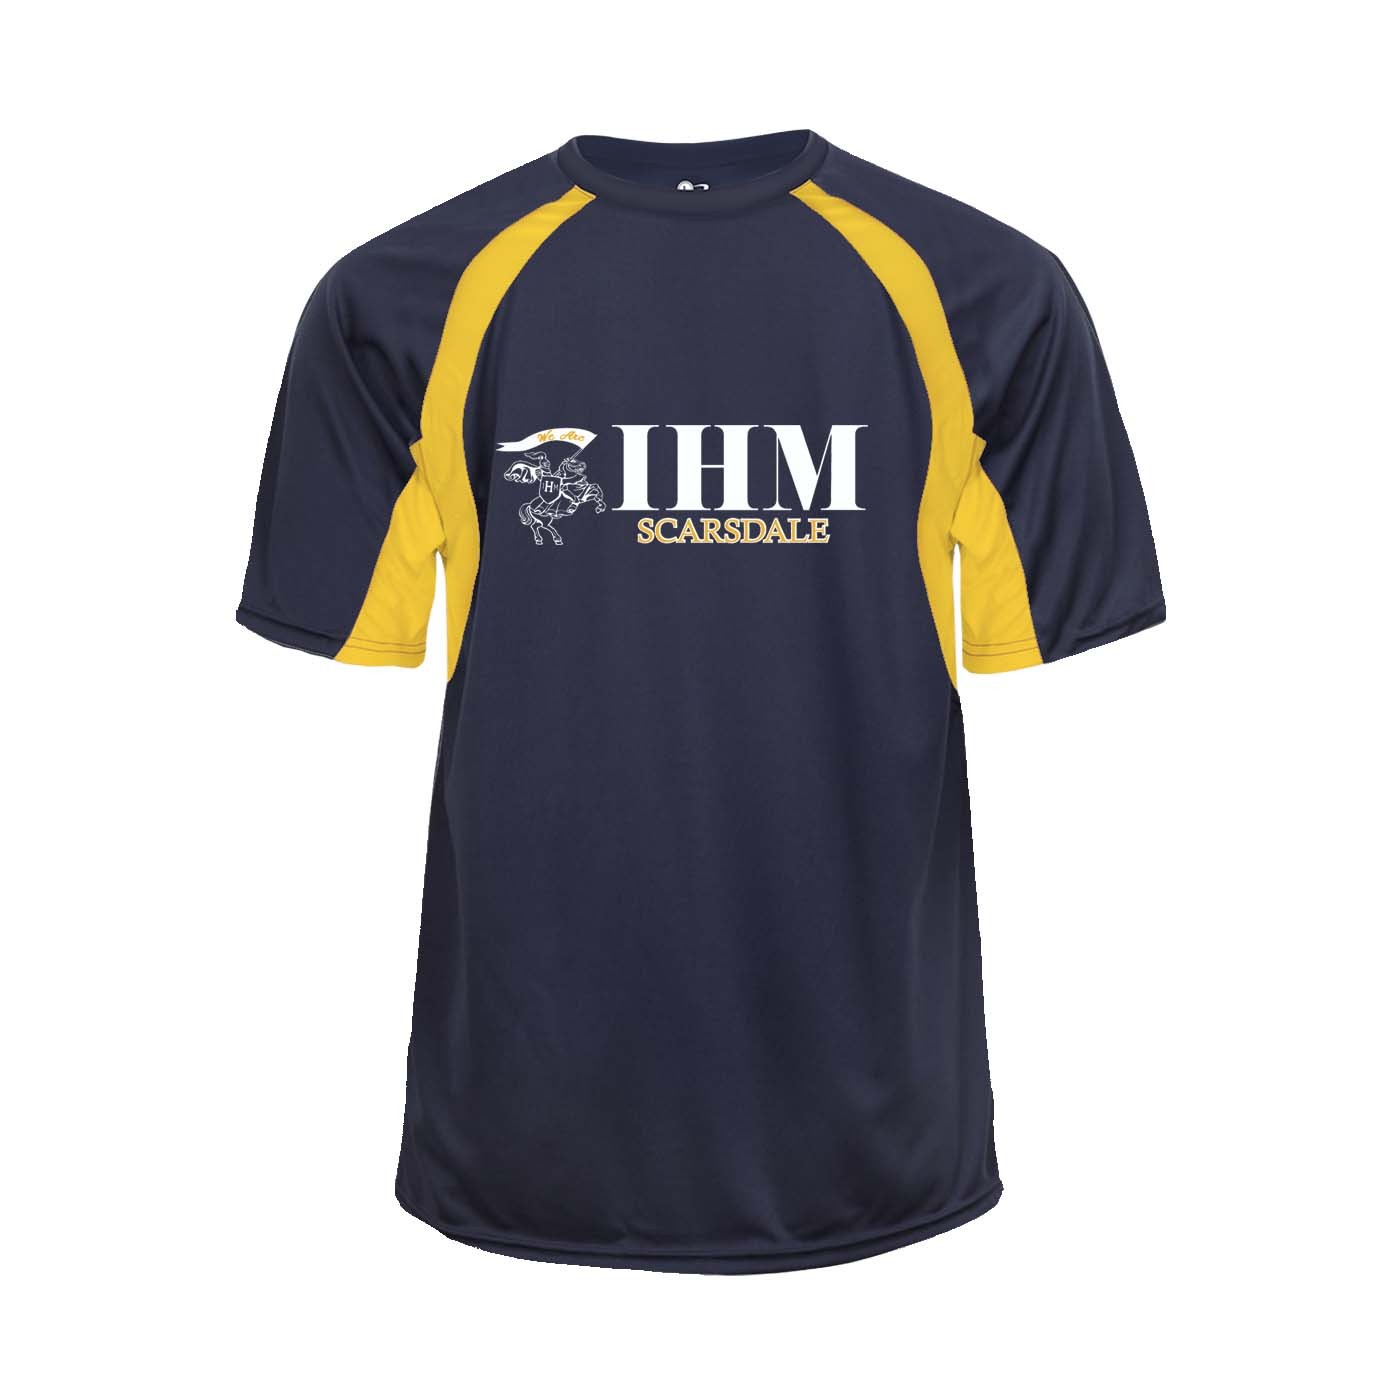 IHM Spirit Hook S/S T-Shirt w/ White Knight Logo - Please Allow 2-3 Weeks for Delivery